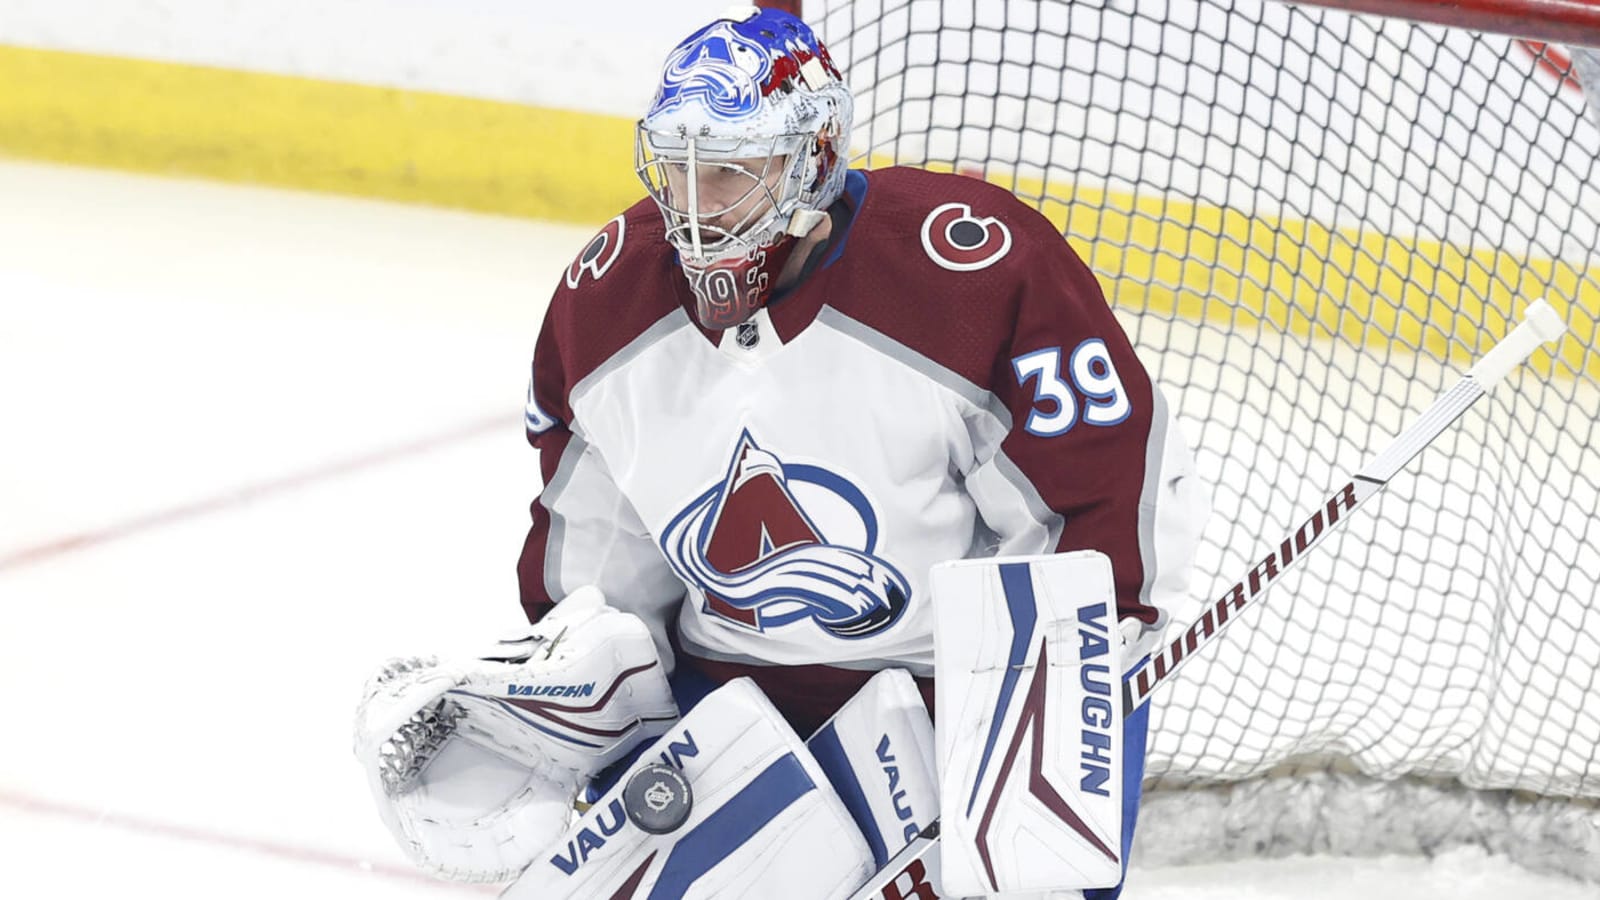 Francouz to start Game 2 for injured Kuemper for Avalanche